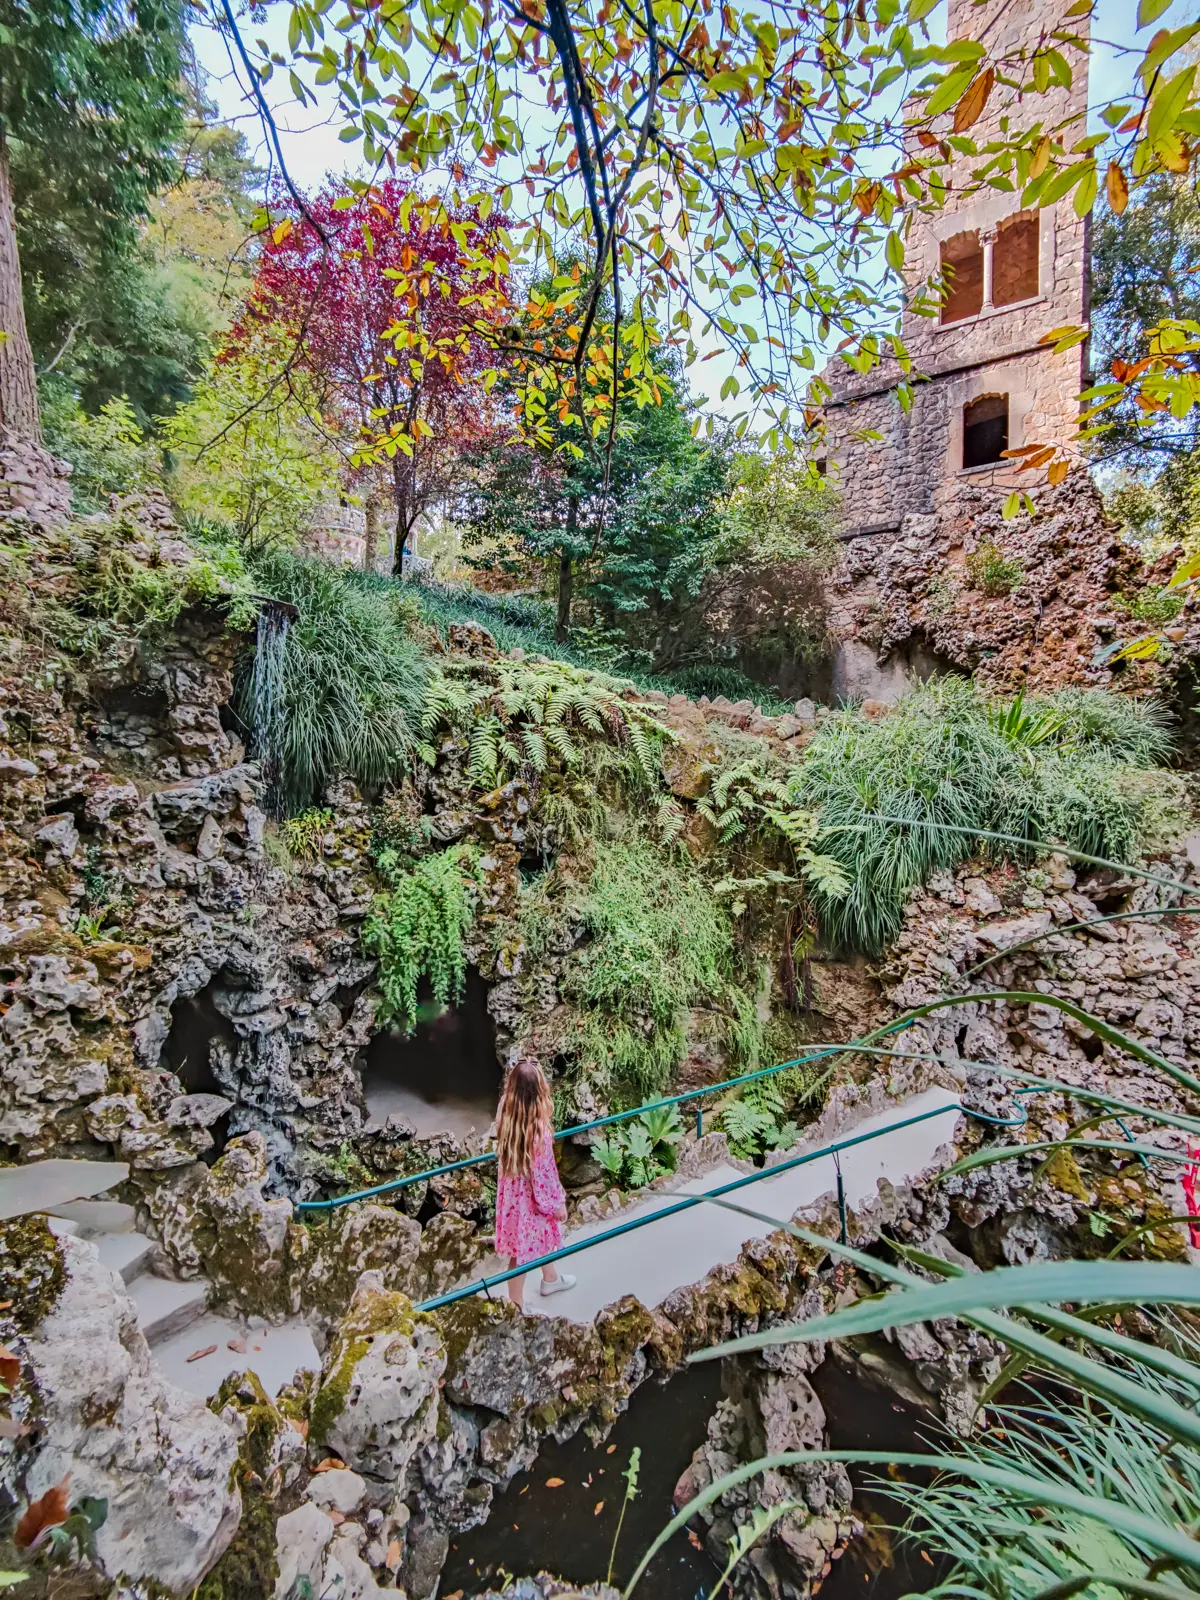 Girl in a pink dress and white shoes walking over a stone bridge along a stone wall with green plants at Quinta da Regaleira palace in Sintra Portugal.